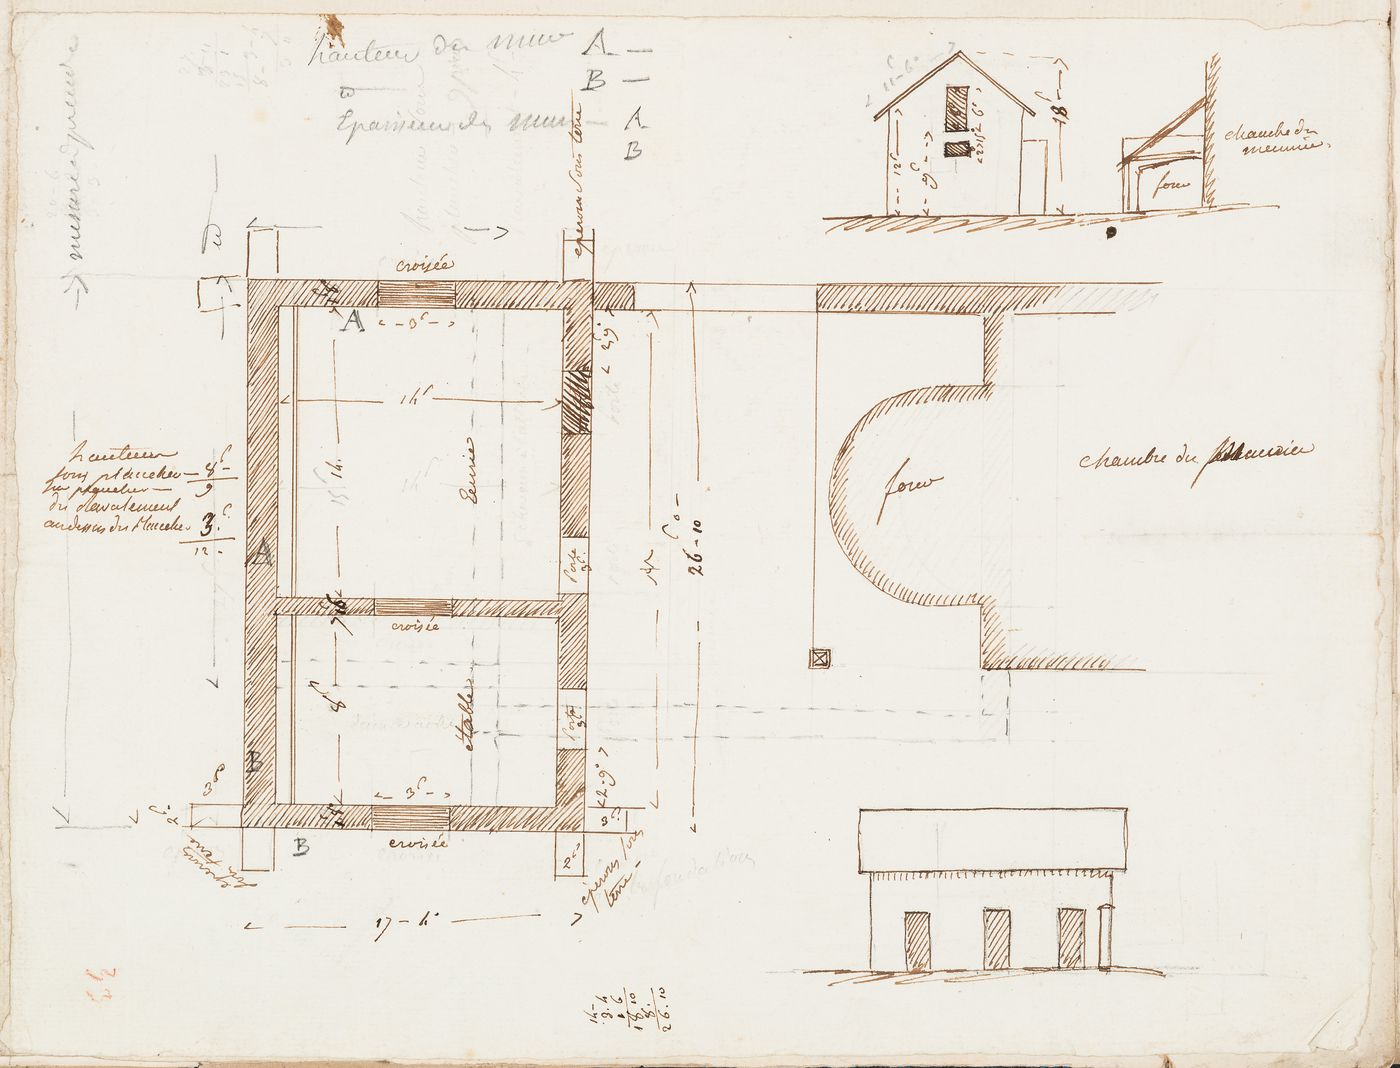 Plan, section and elevations for a stable and cowshed, probably for Domaine de La Vallée